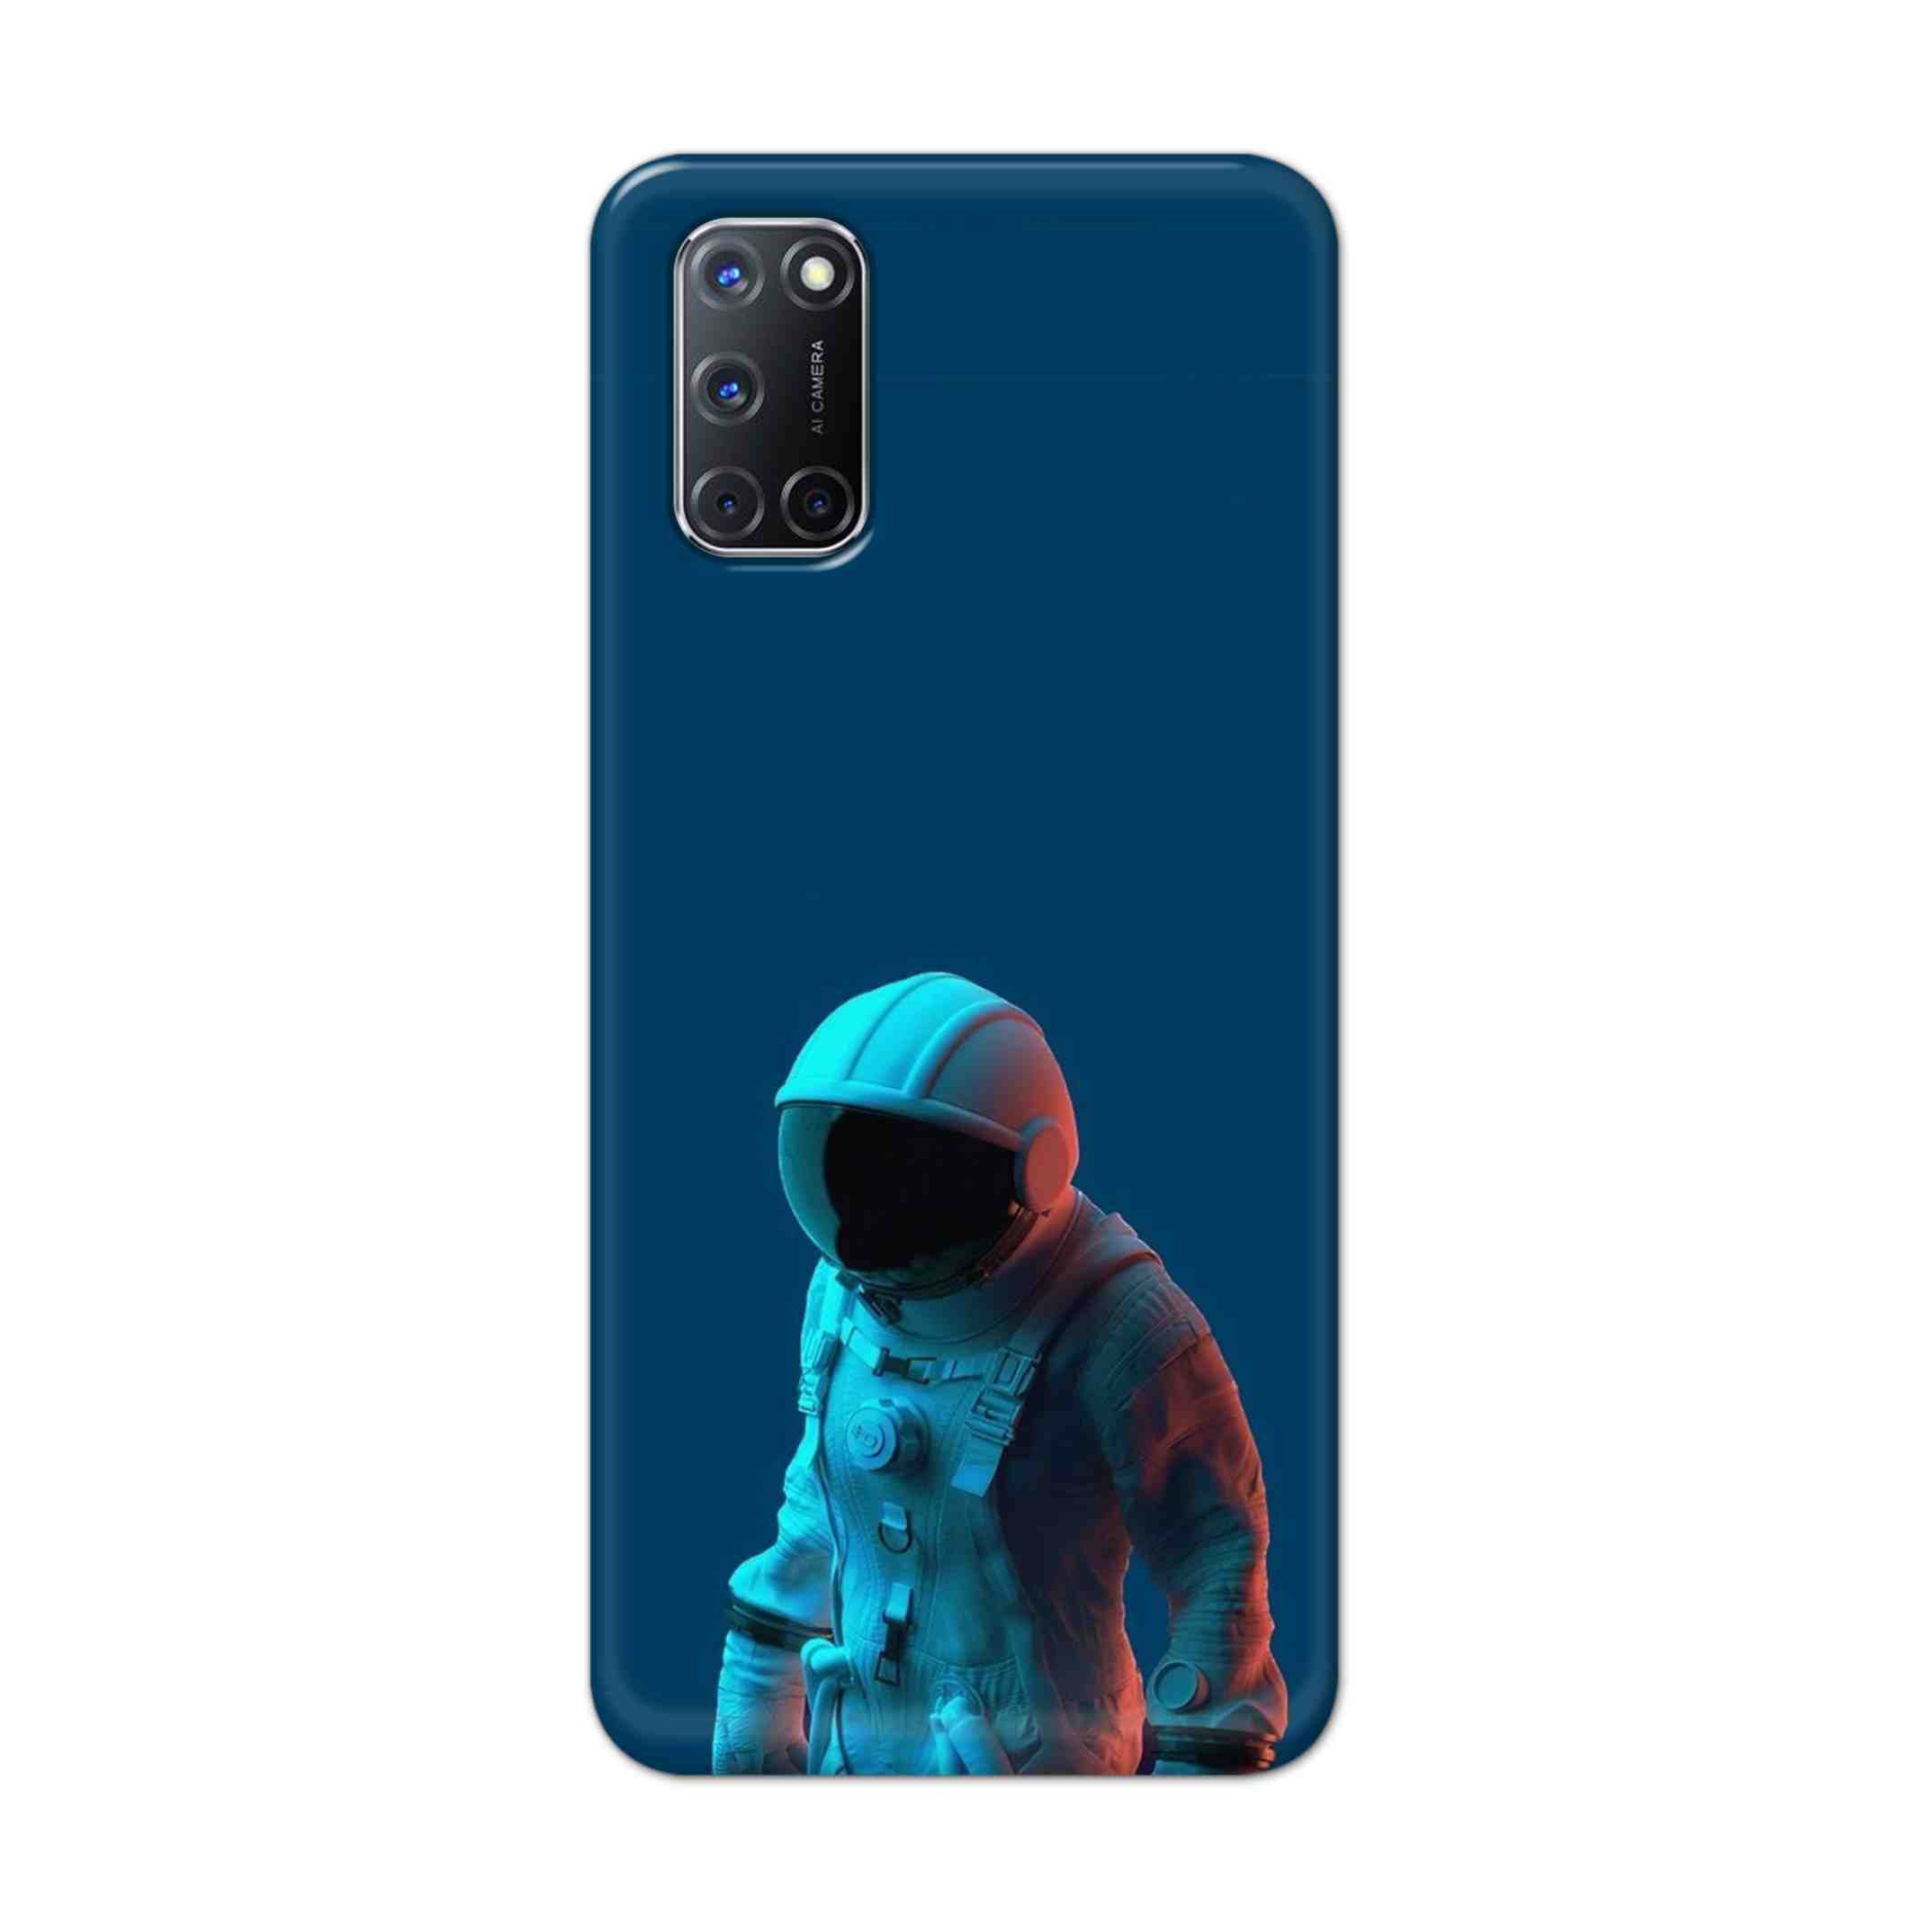 Buy Blue Astronaut Hard Back Mobile Phone Case Cover For Oppo A52 Online